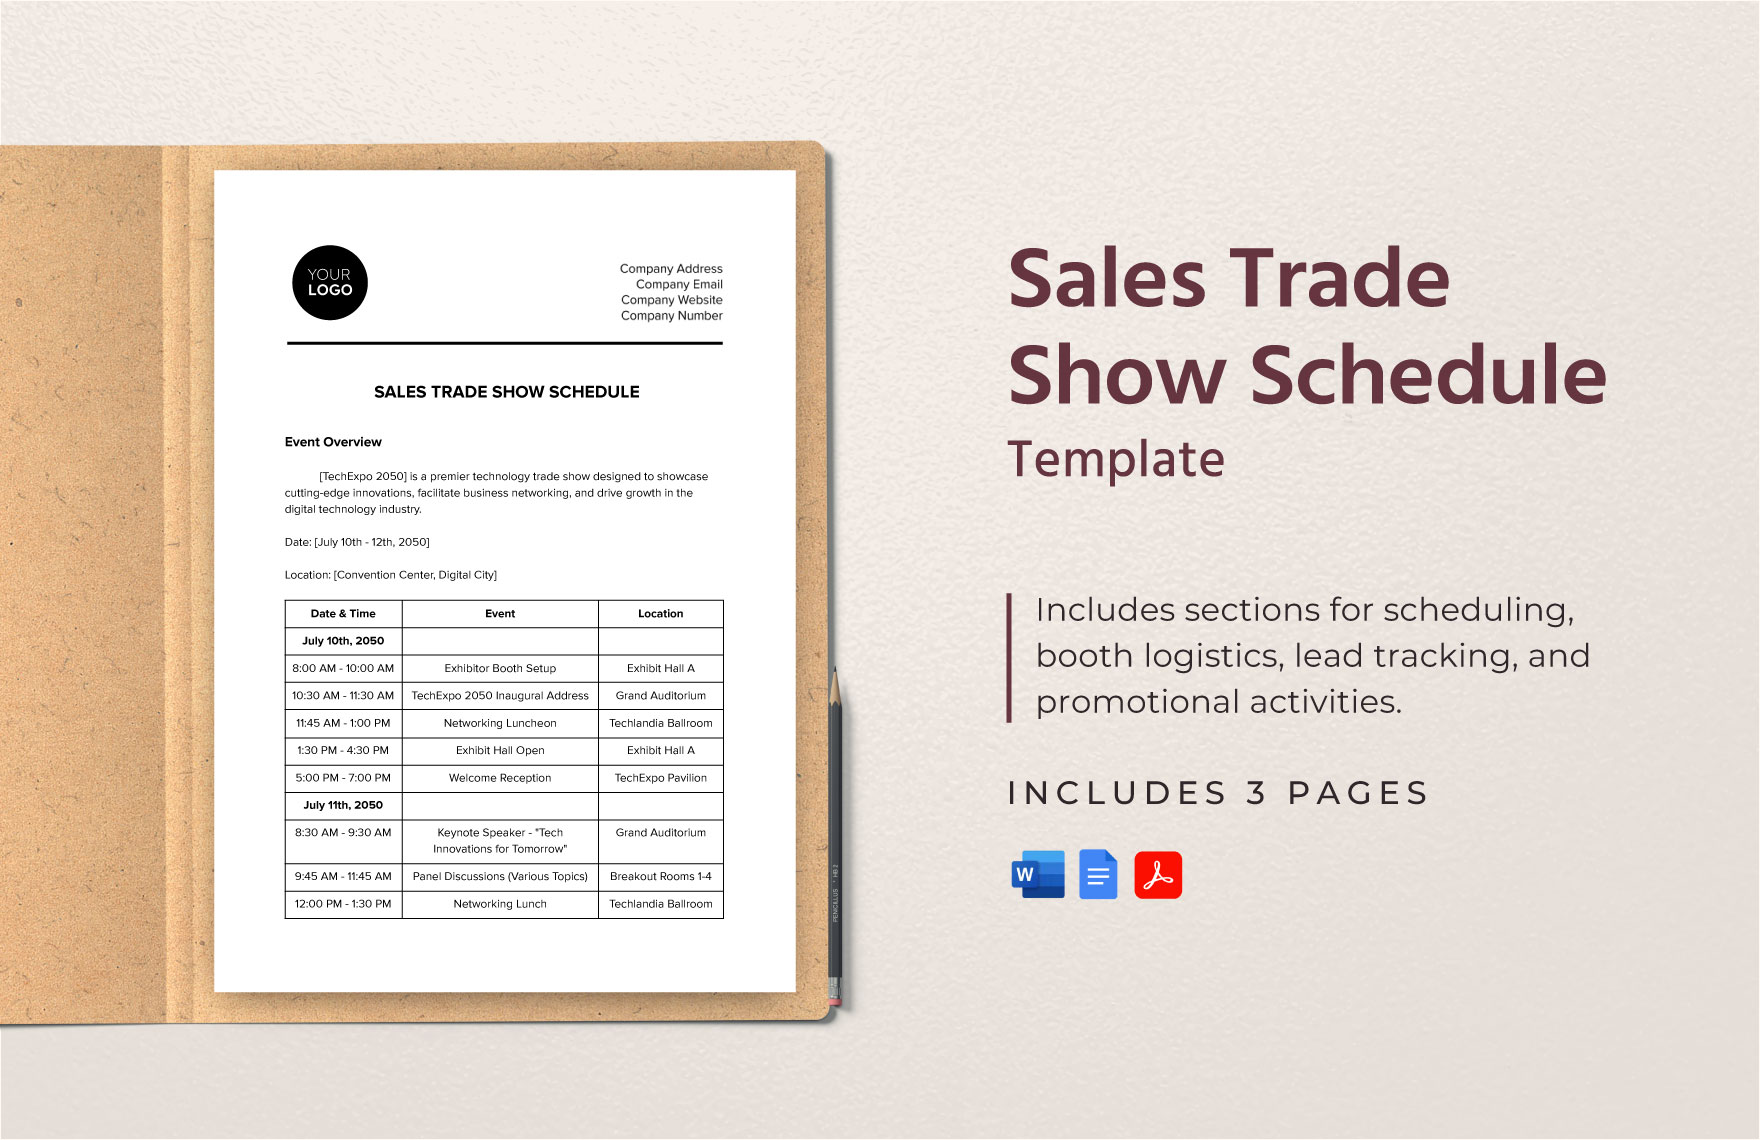 Sales Trade Show Schedule Template